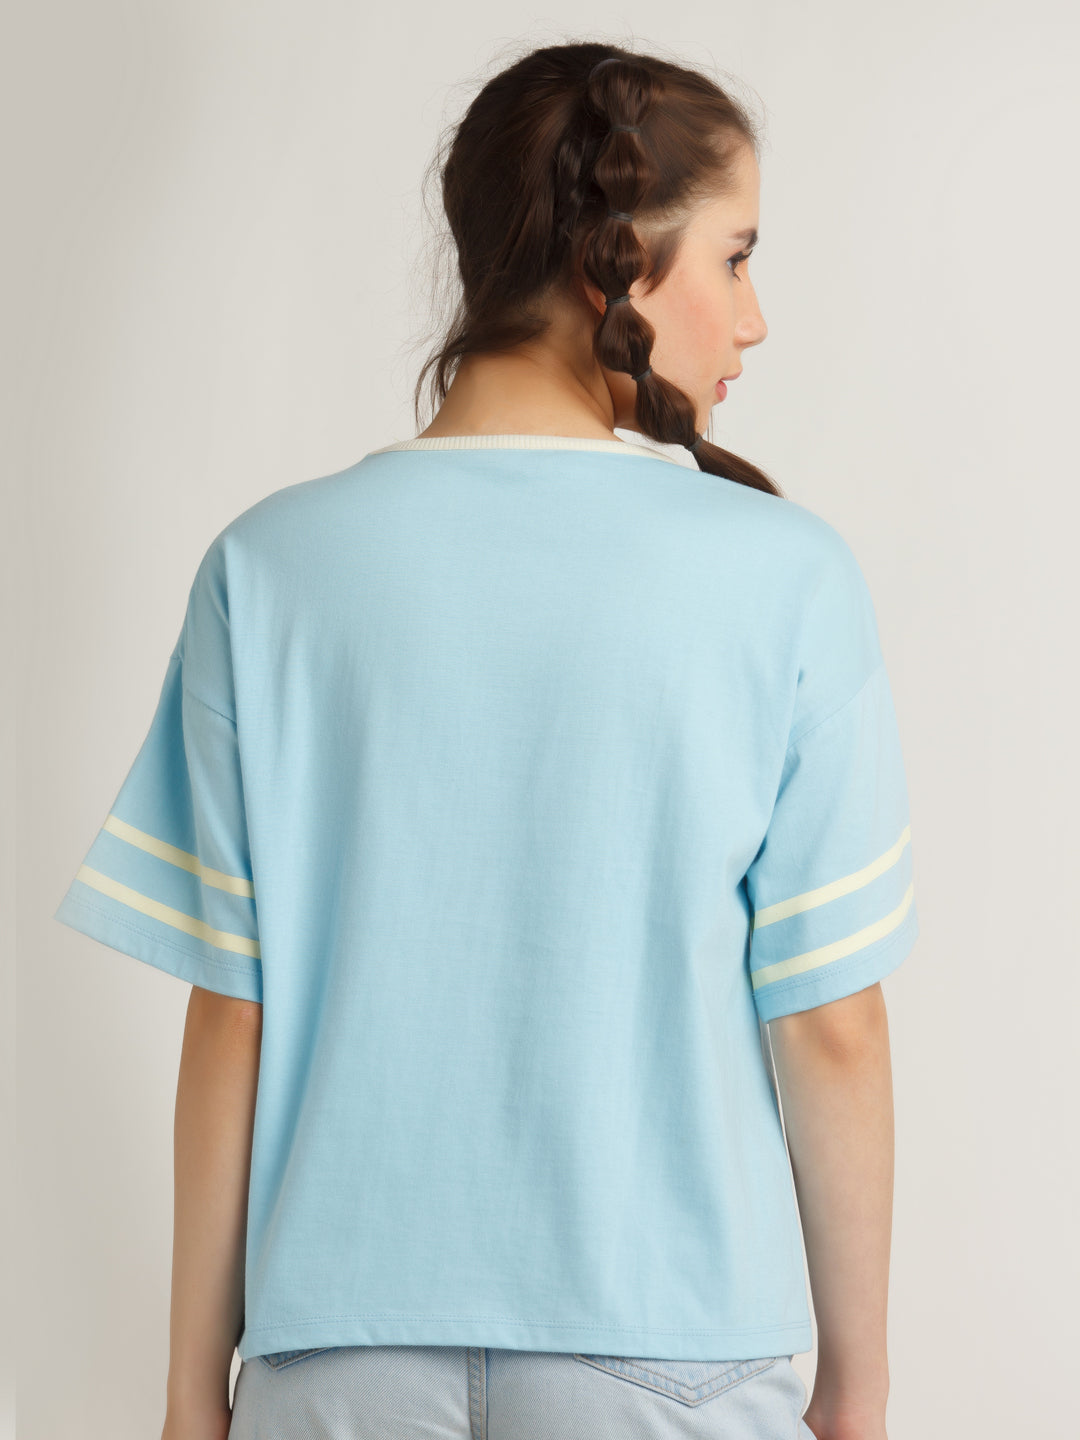 Blue Embroidered Varsity T-Shirt For Women